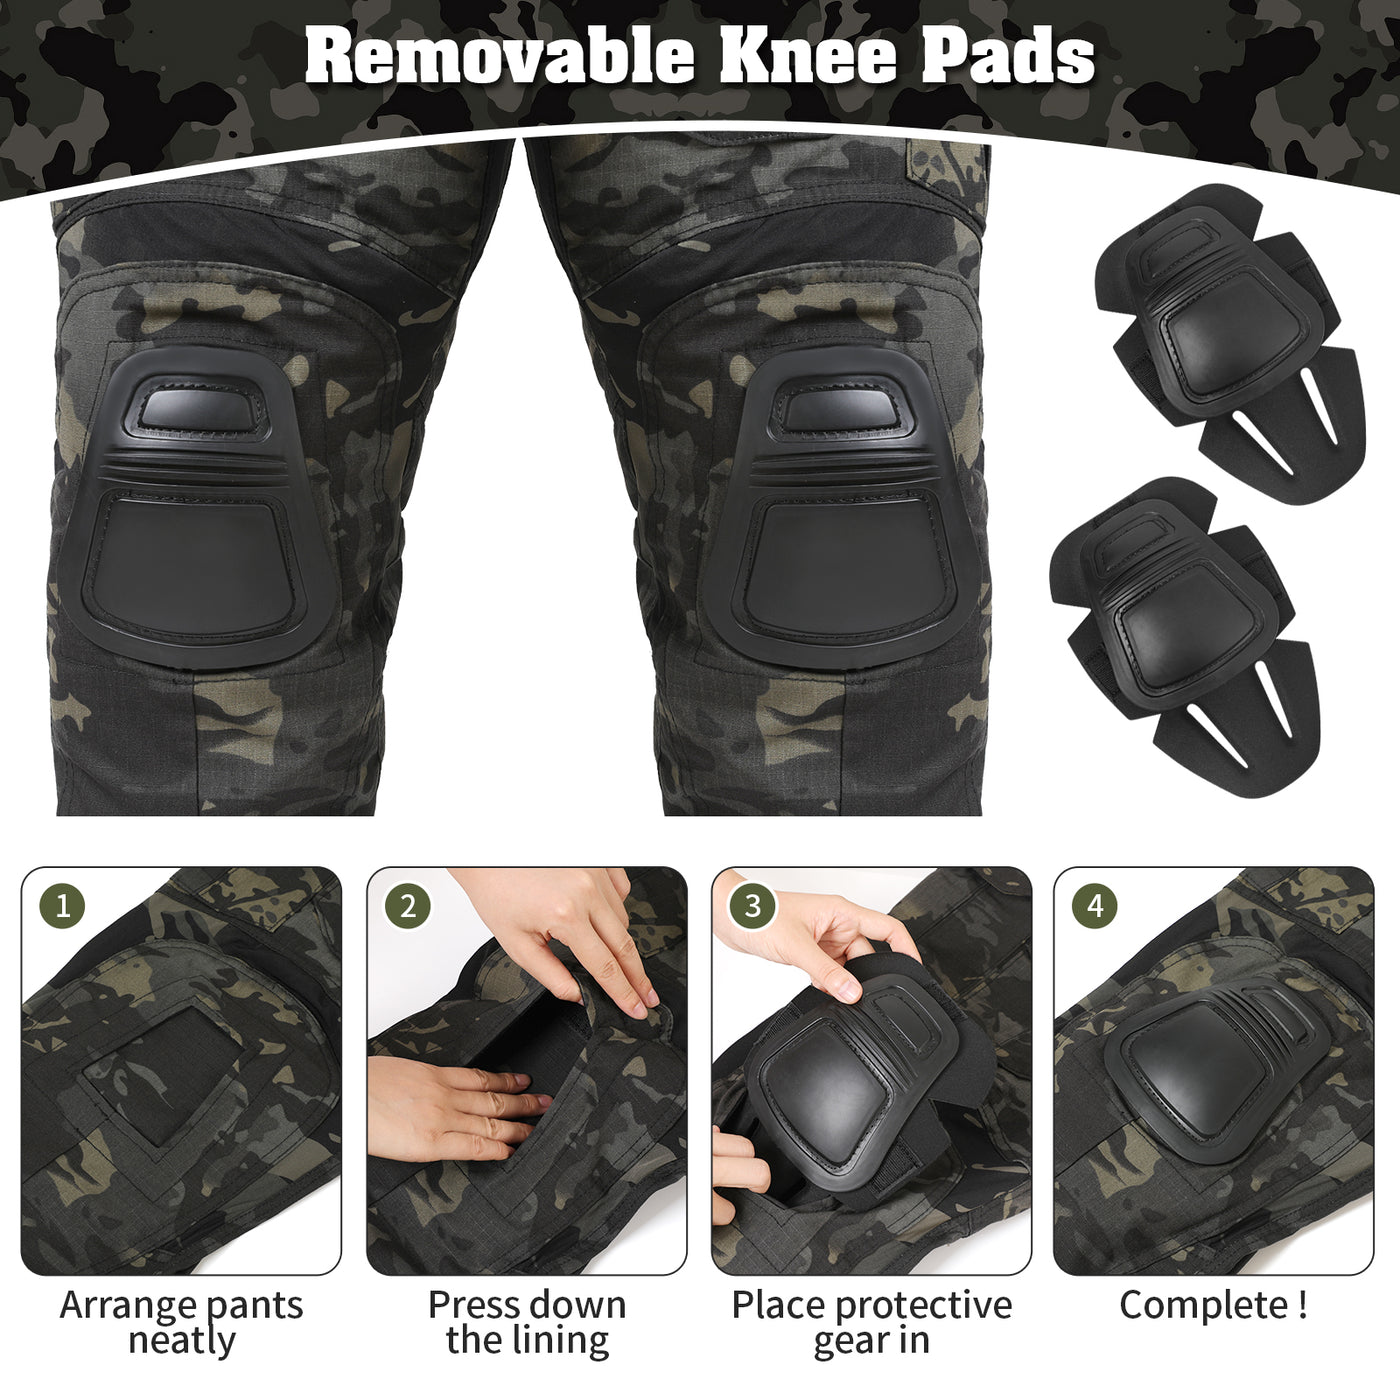 G3 Combat Trousers with Knee Pads Rip-Stop Tactical Trousers